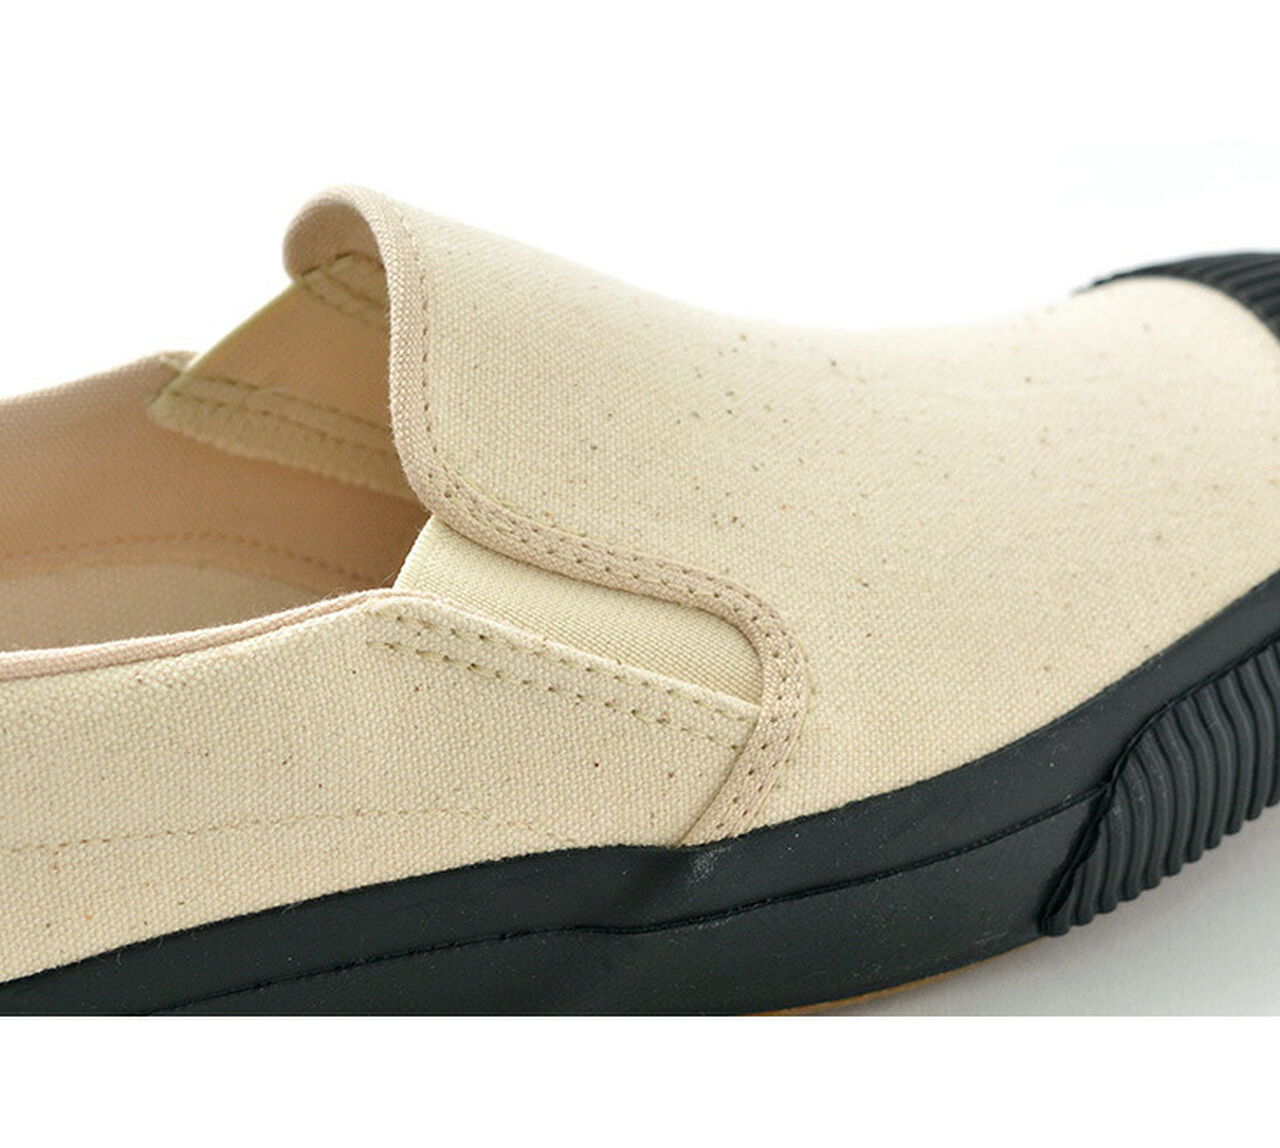 Shellcap Molded Slip-On Sneakers,, large image number 7